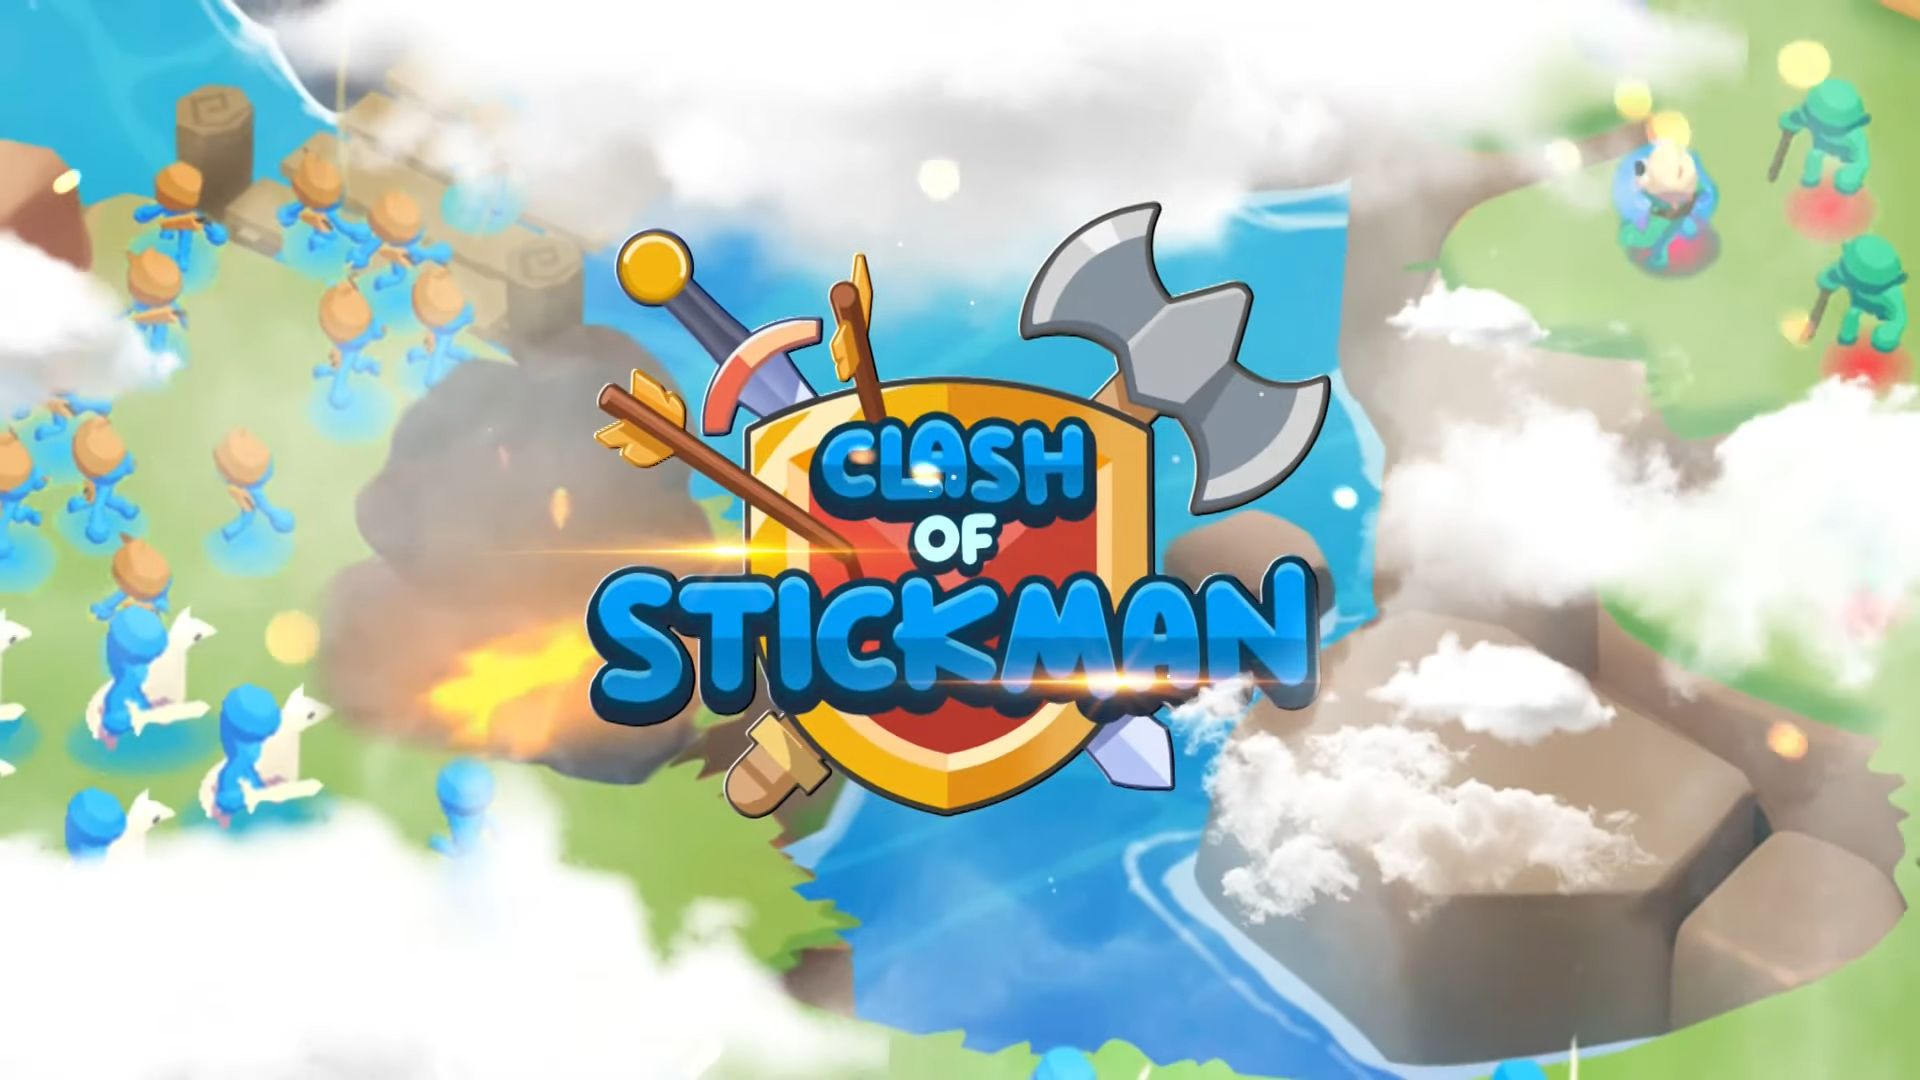 Full version of Android A.n.d.r.o.i.d. .5...0. .a.n.d. .m.o.r.e apk Clash of Stickman for tablet and phone.